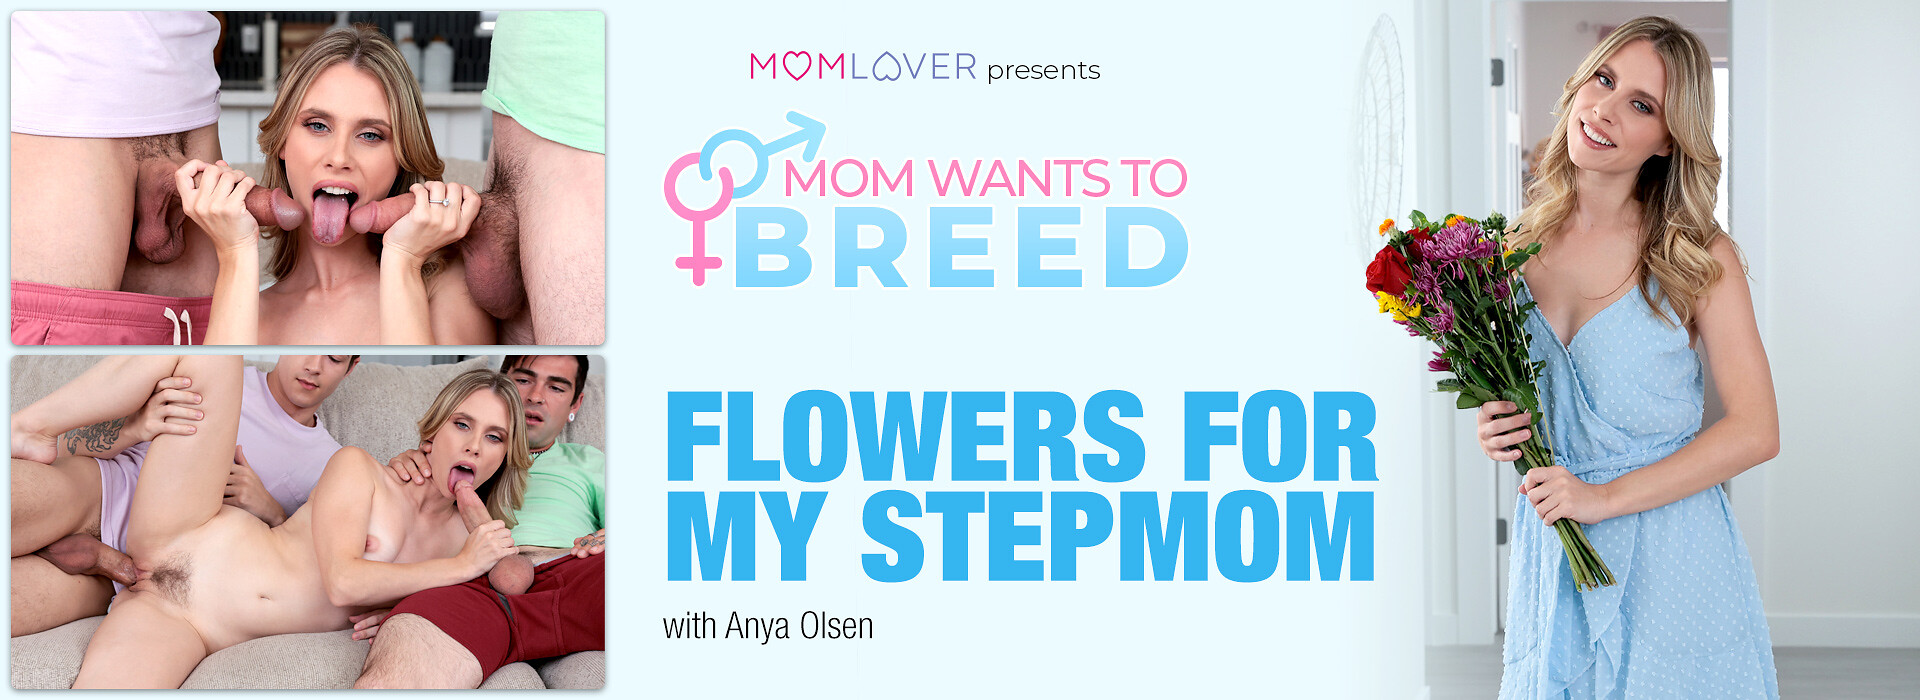 Mom want to breed